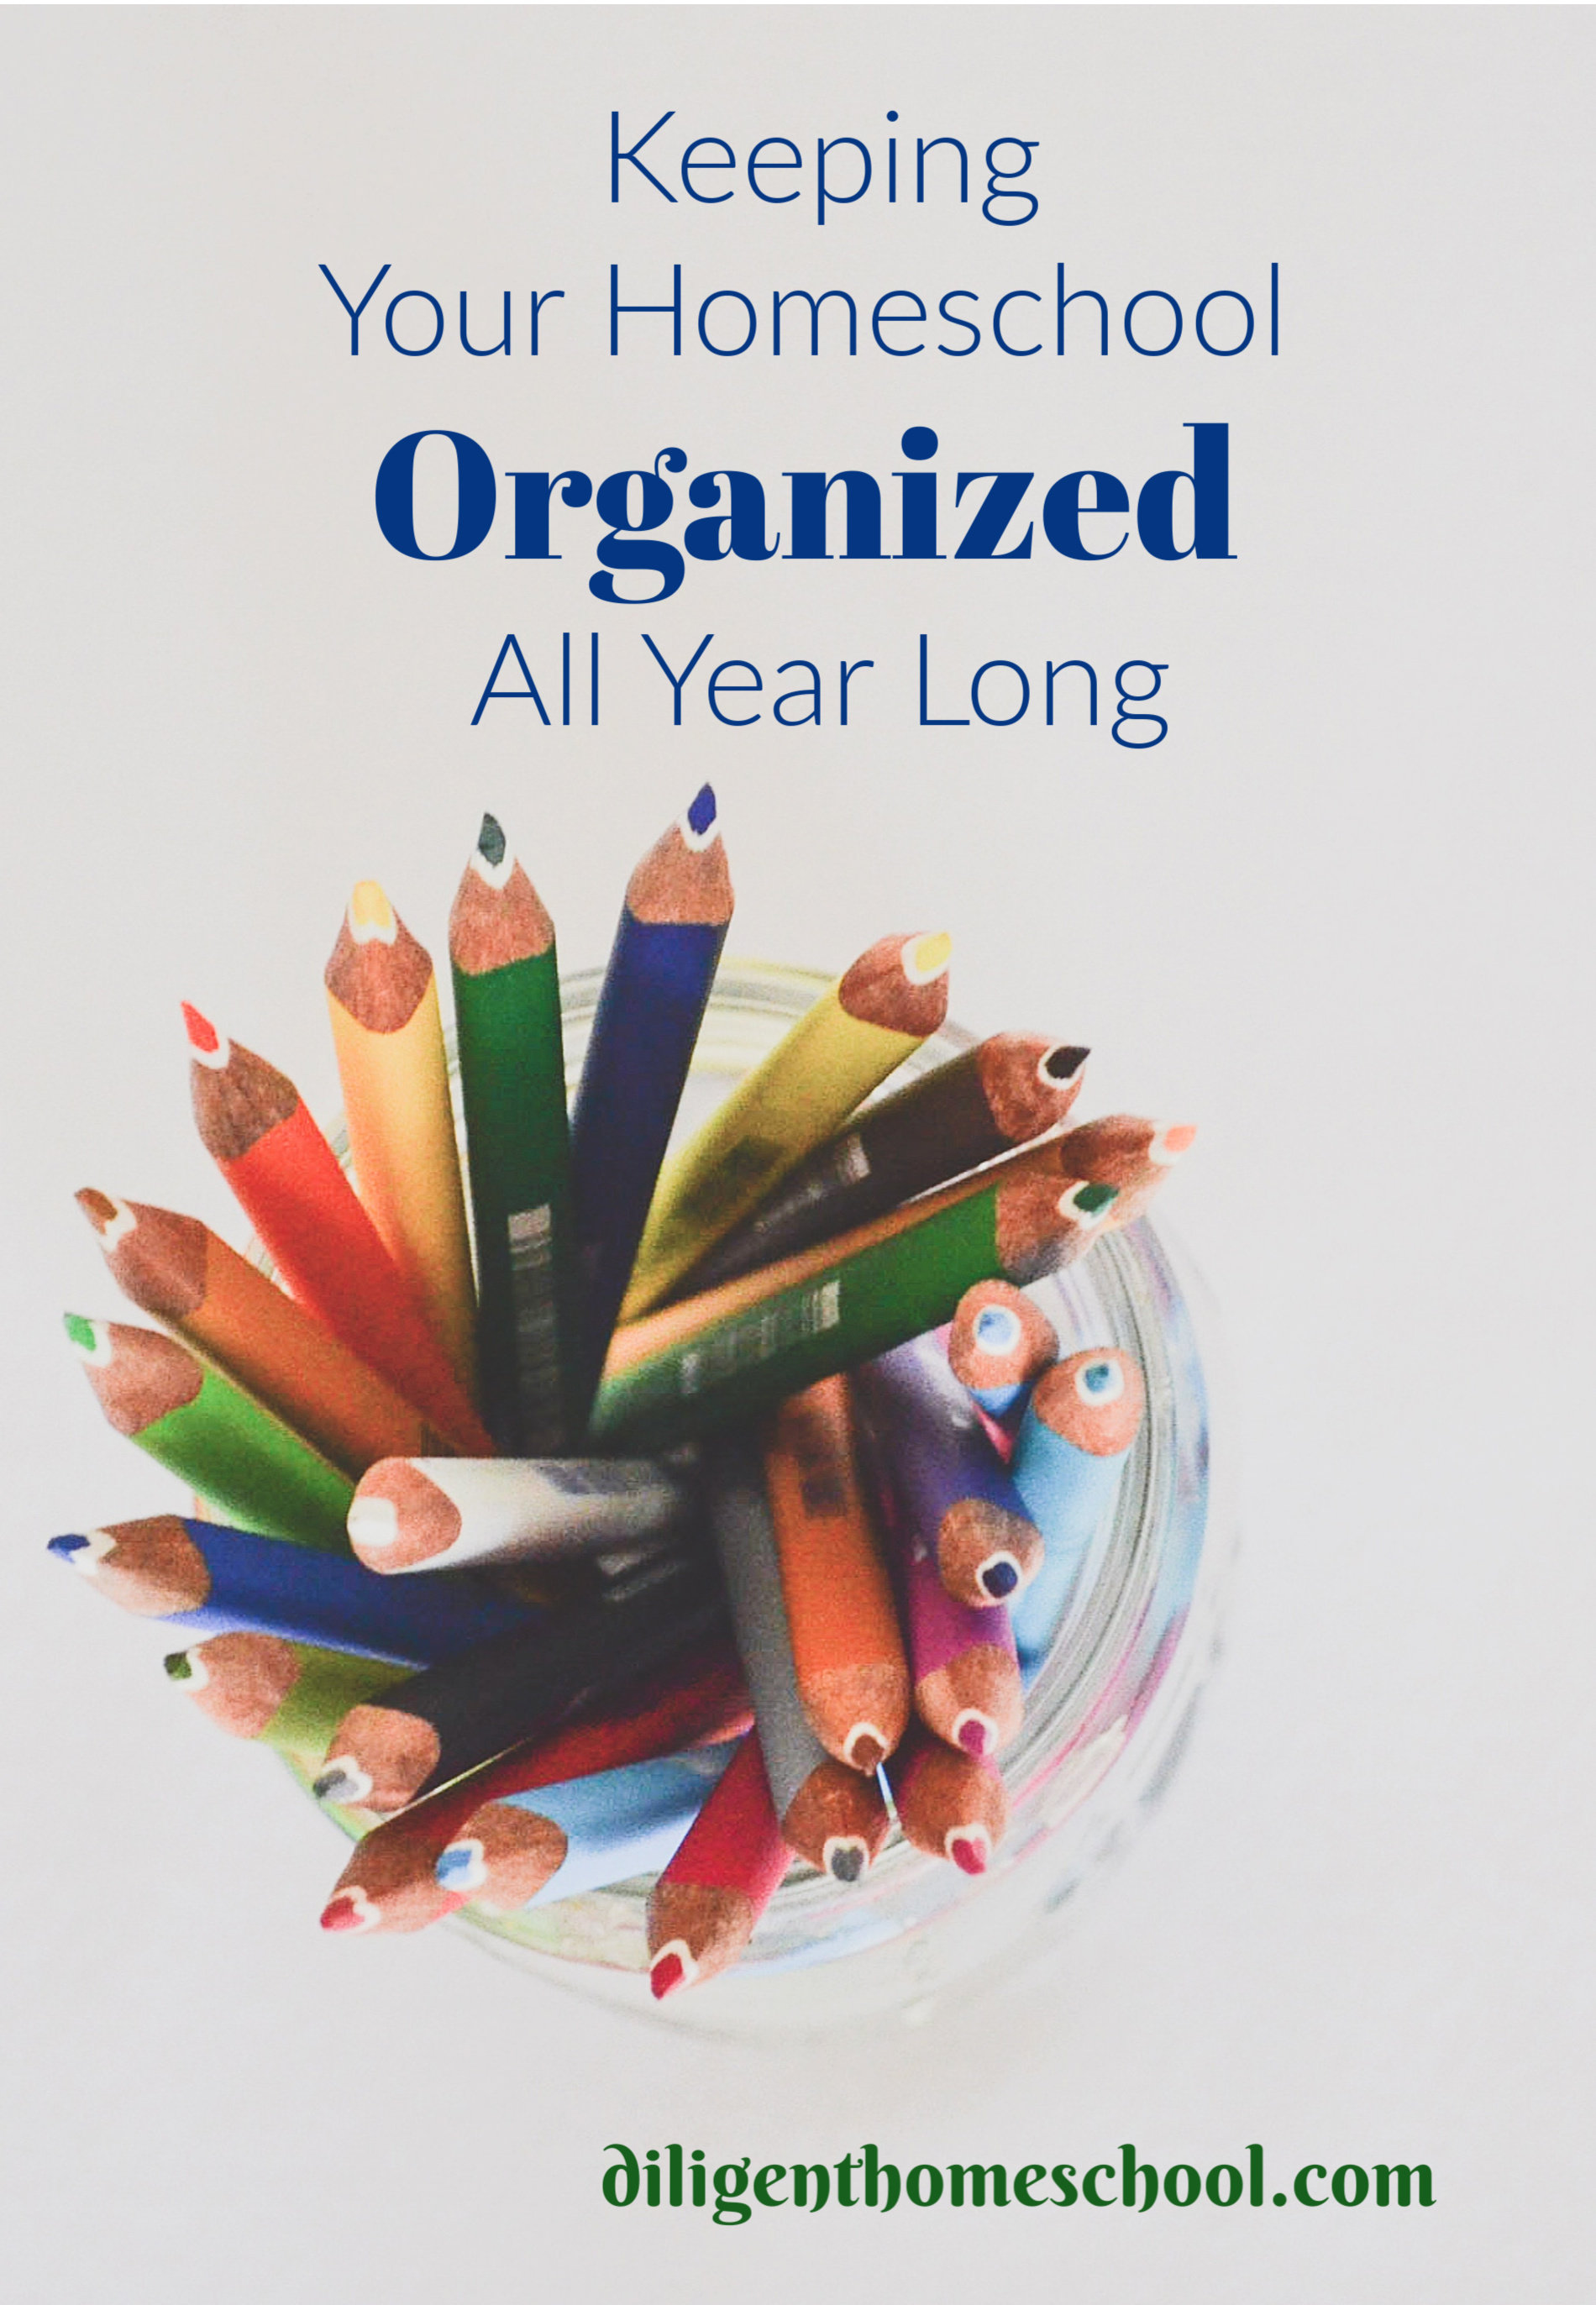 Are you looking for ways to be more productive in your homeschool? Our tips will help you with keeping your homeschool organized all year long!